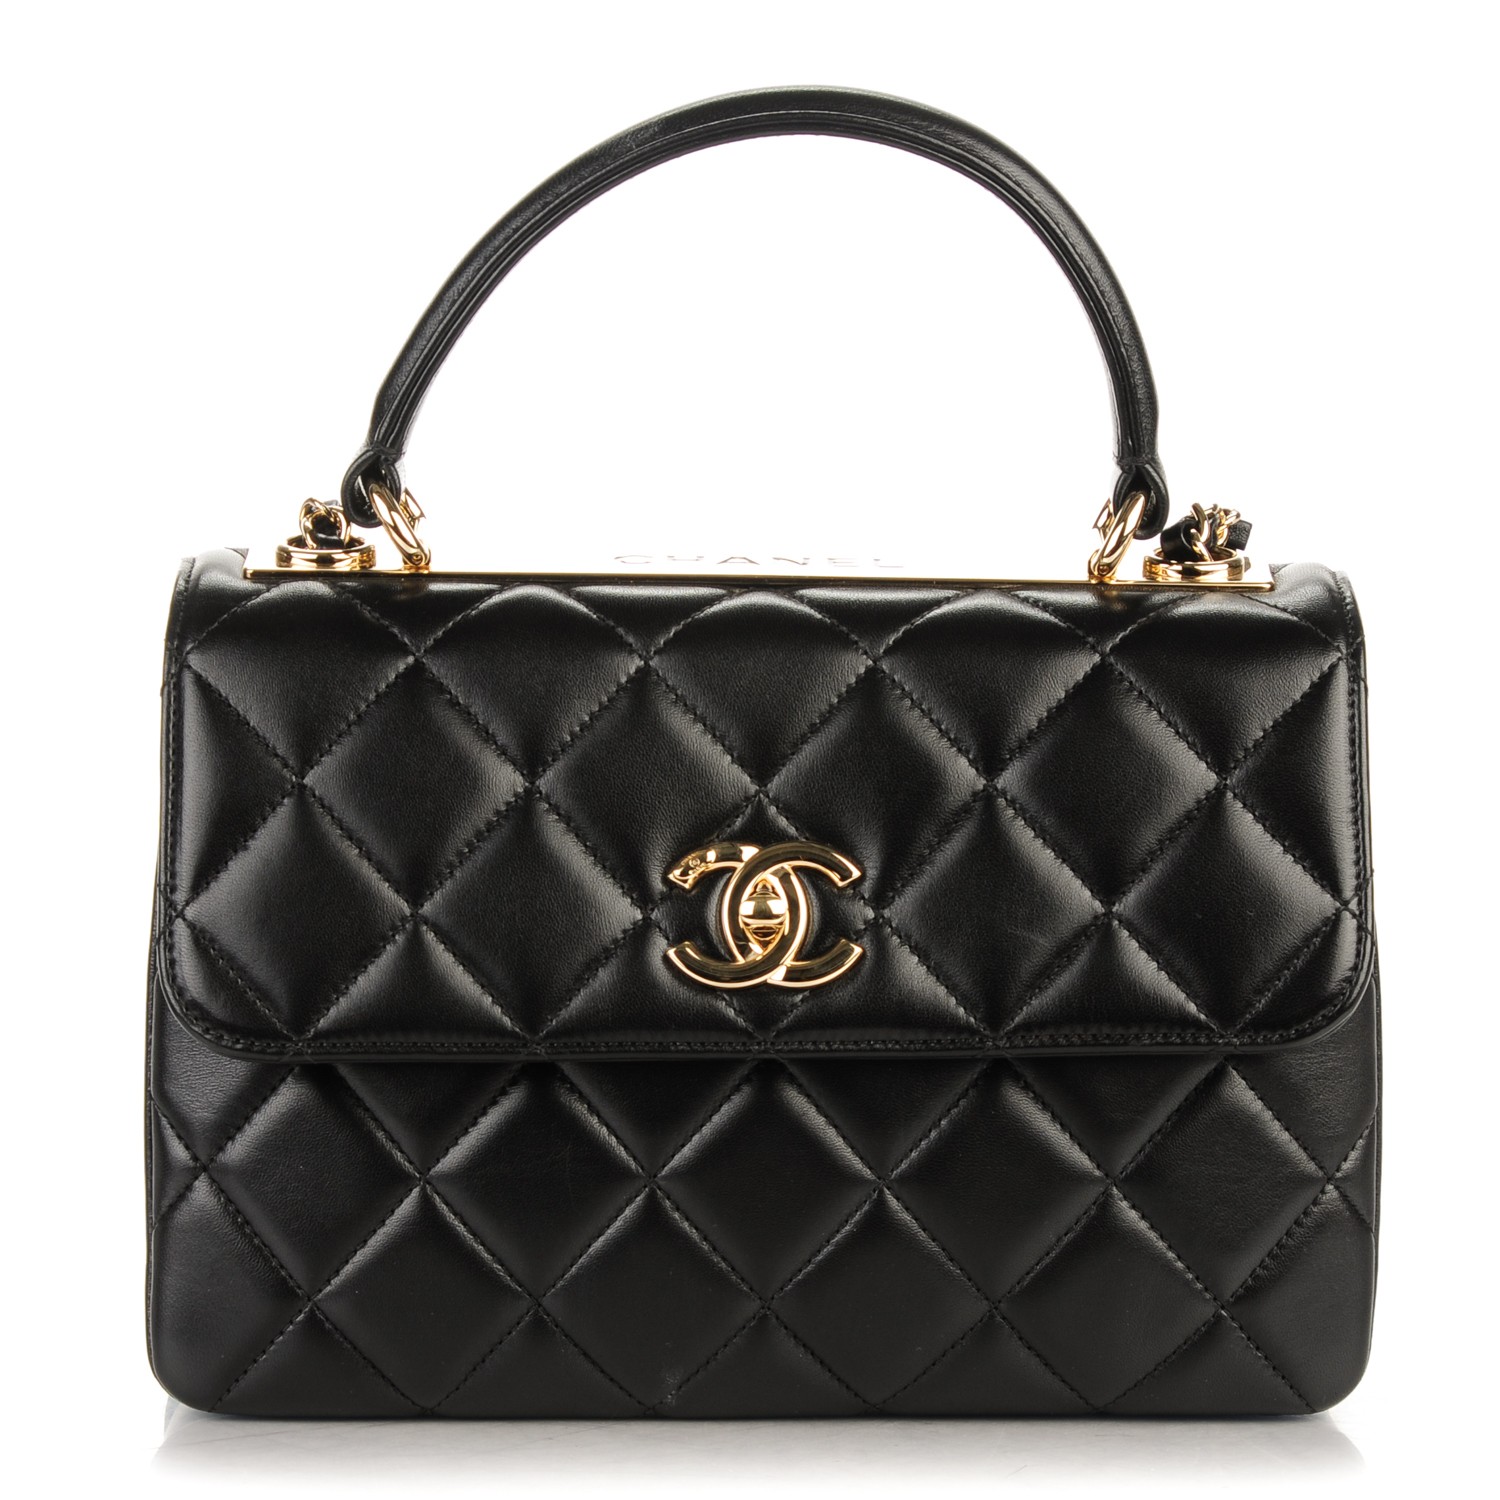 CHANEL Lambskin Quilted Small Trendy CC Dual Handle Flap Bag Black 159622